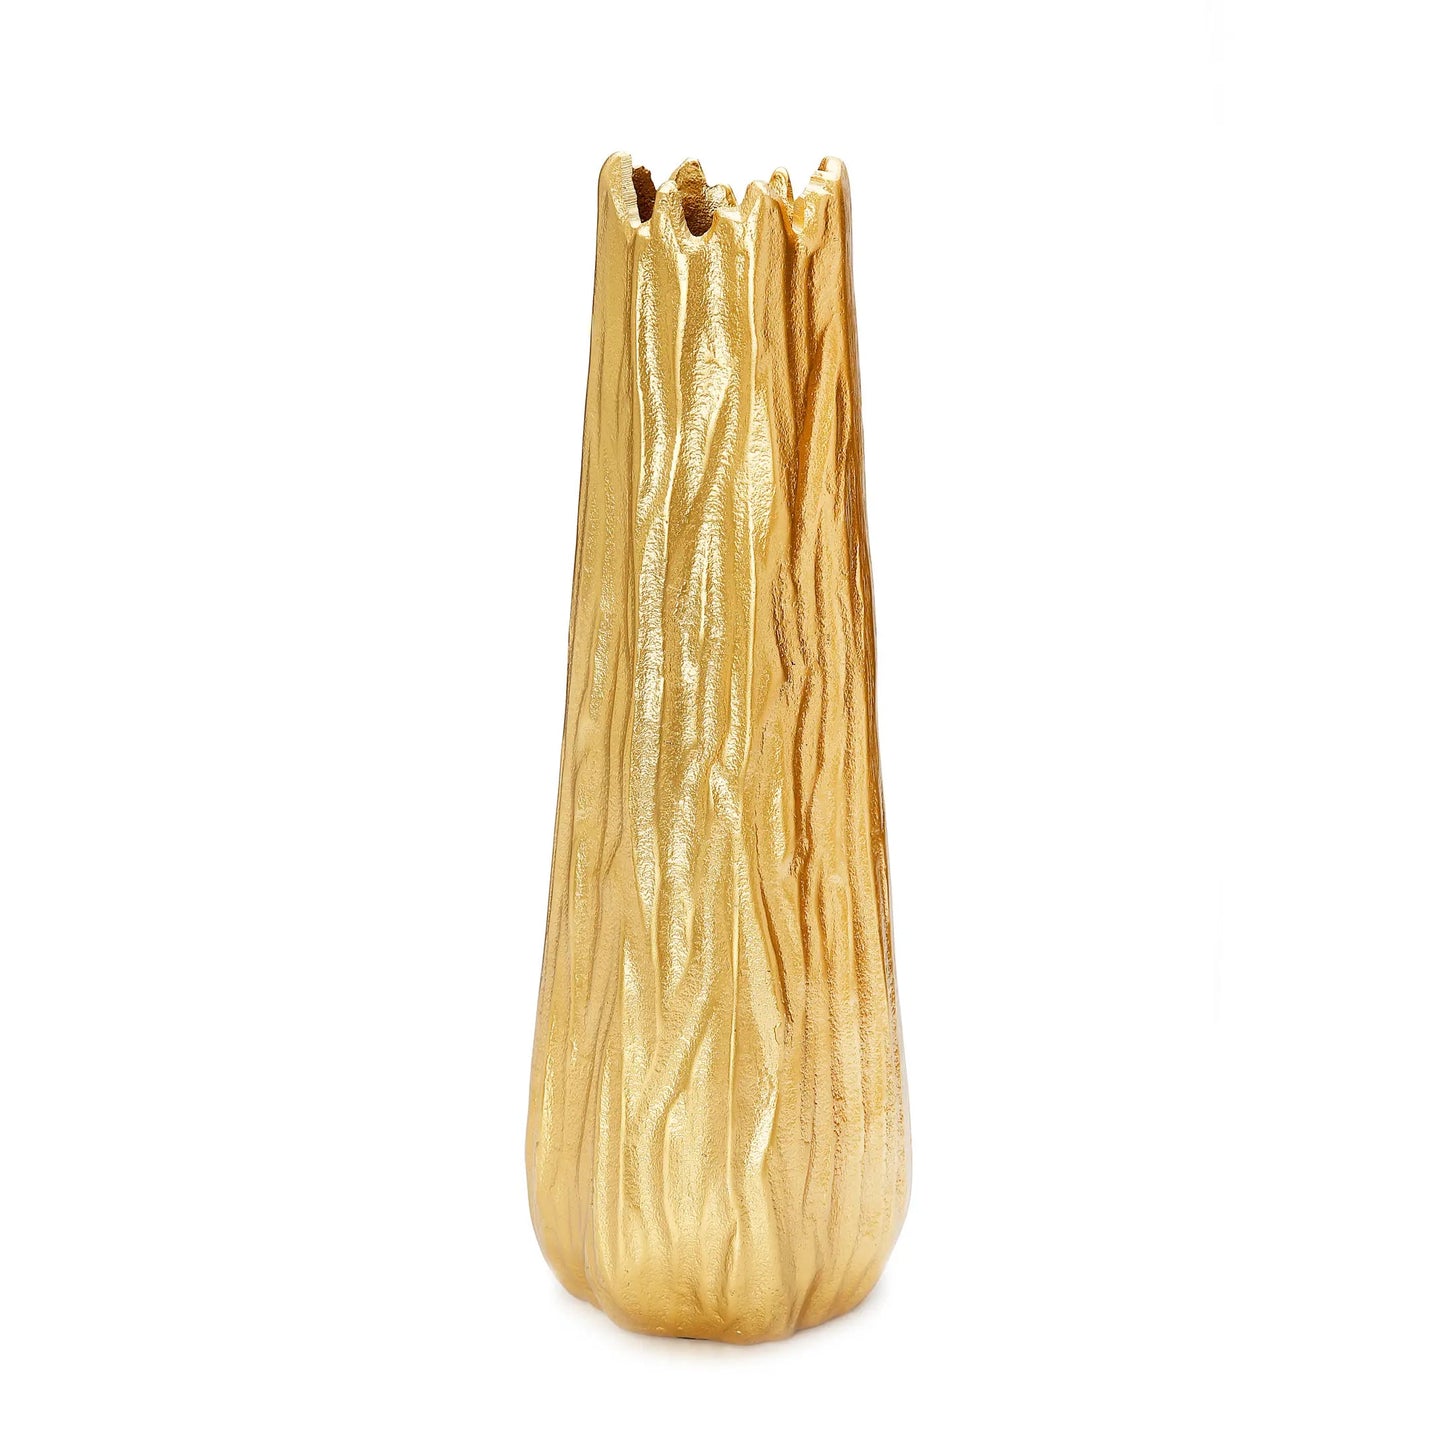 Gold Branch Vase Vases High Class Touch - Home Decor 